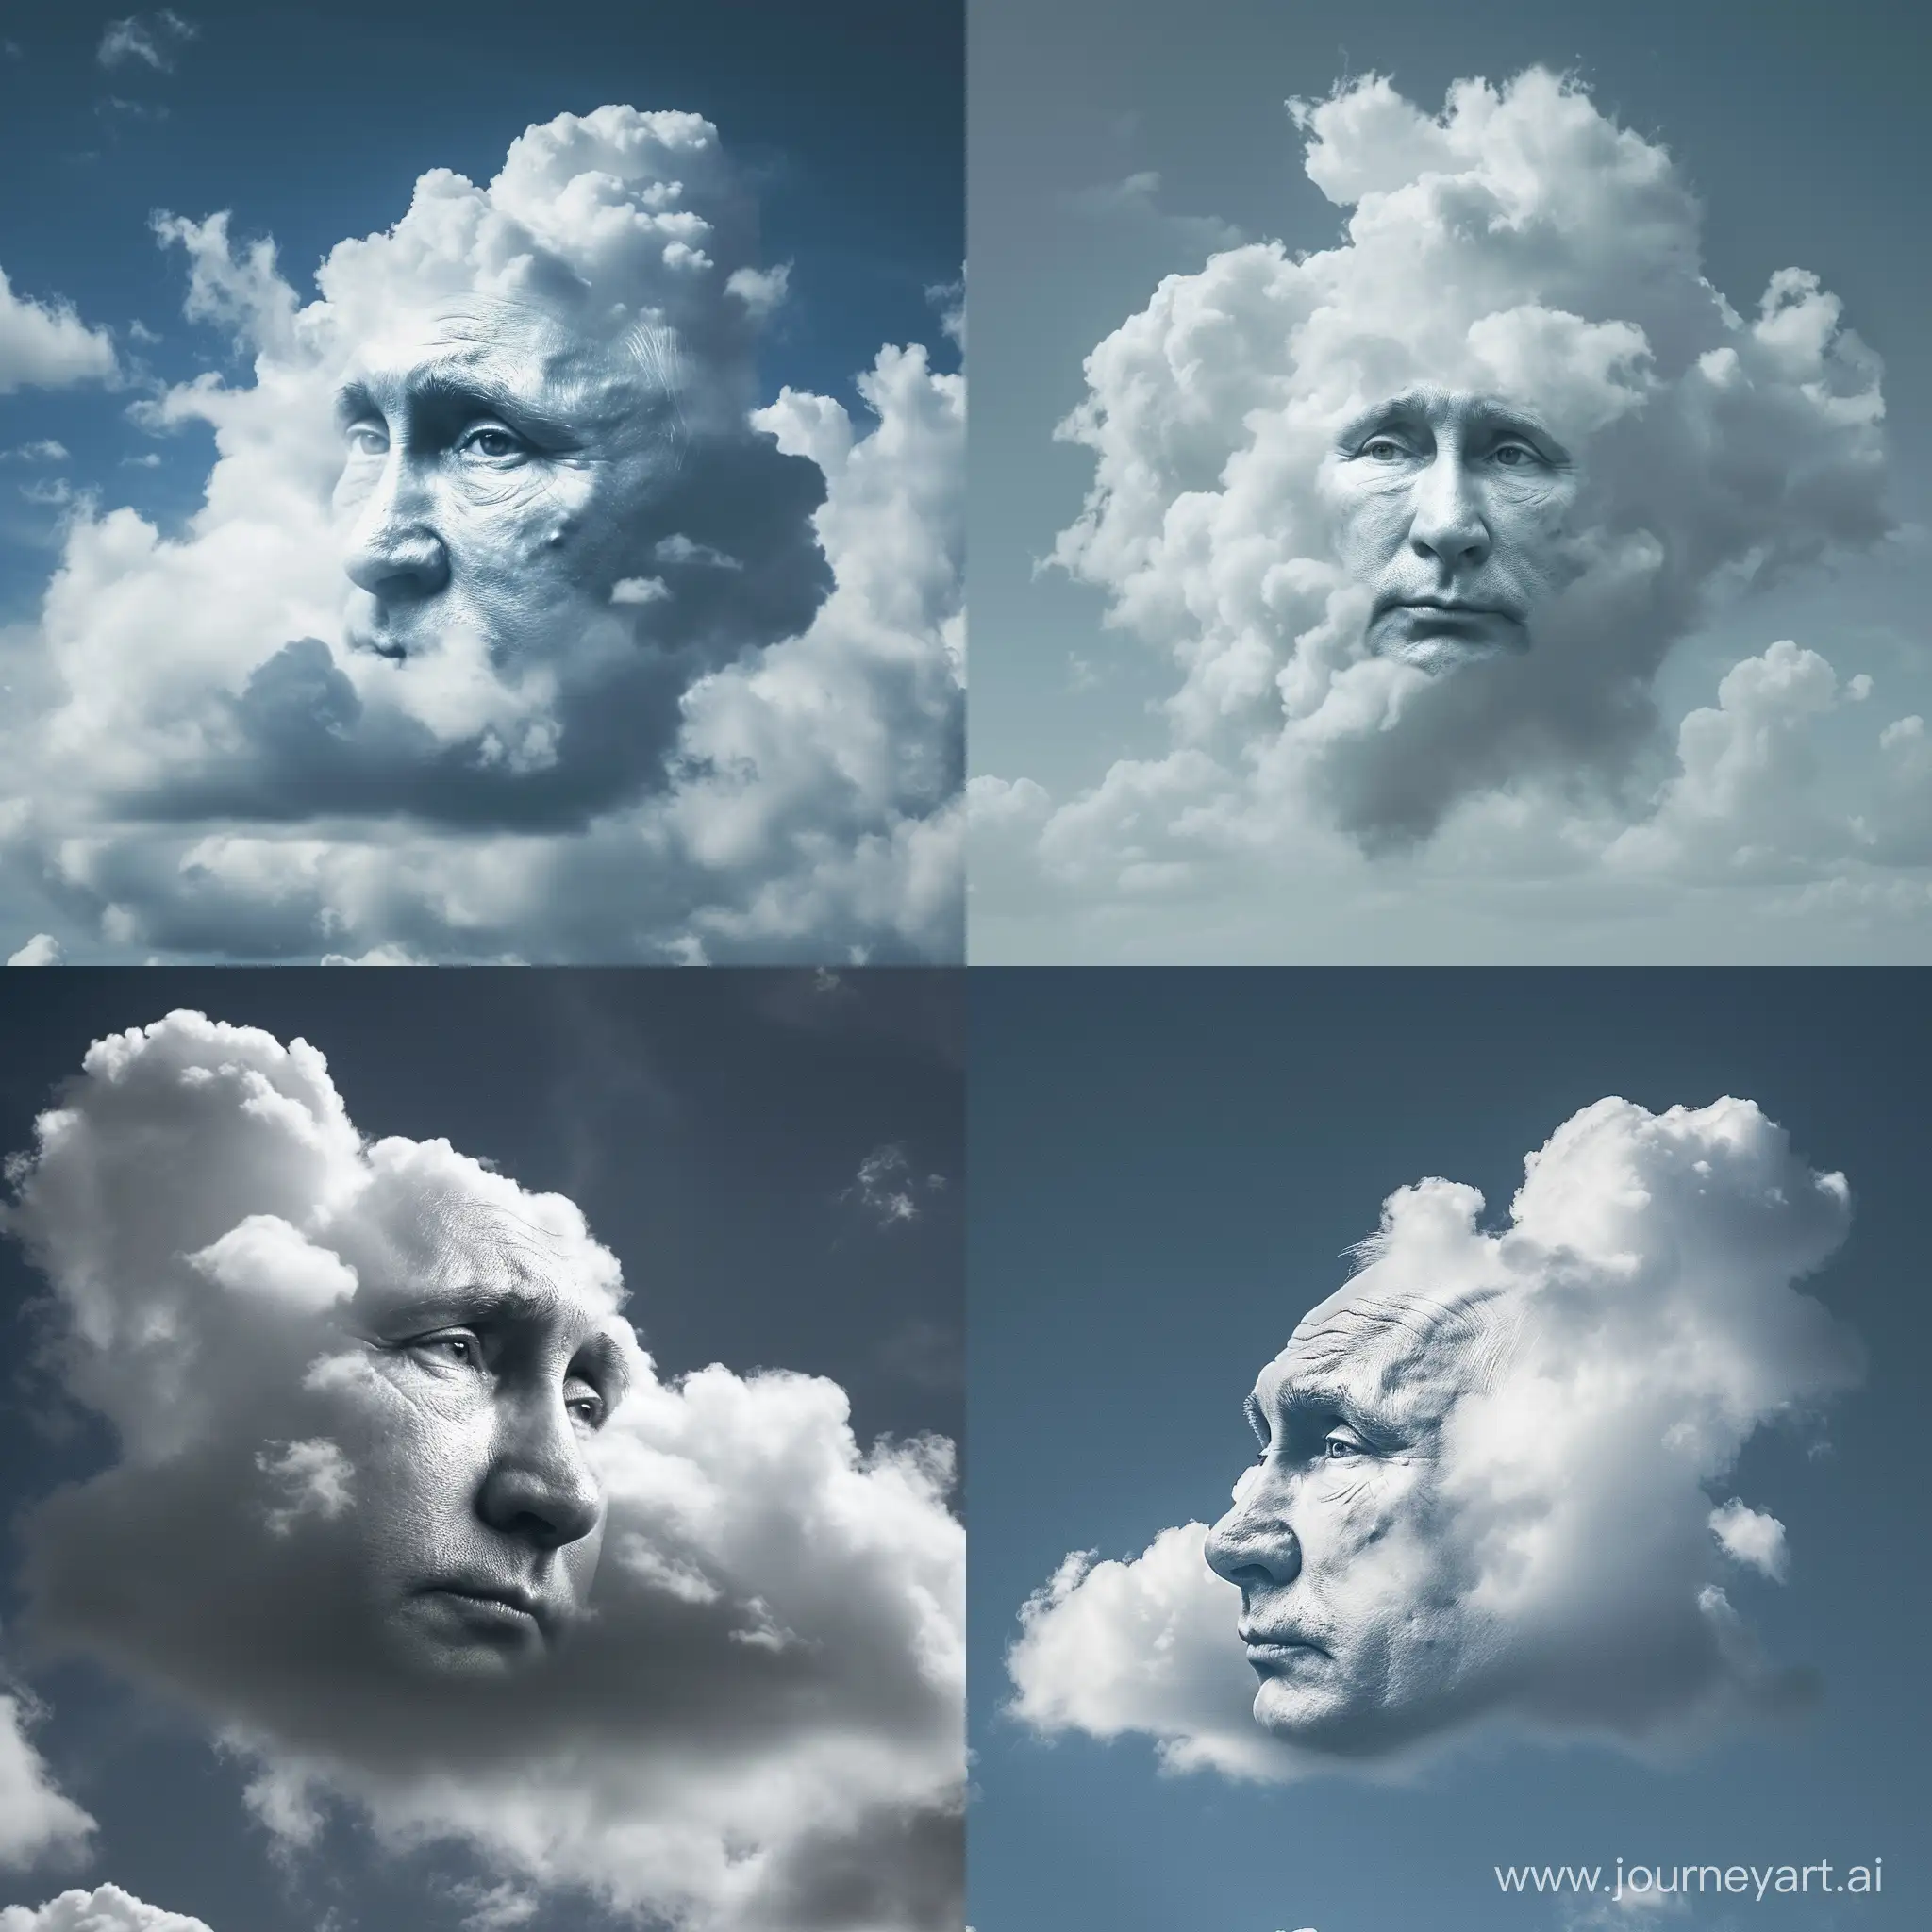 Putins-Face-in-the-Clouds-Striking-Image-of-Political-Impressionism